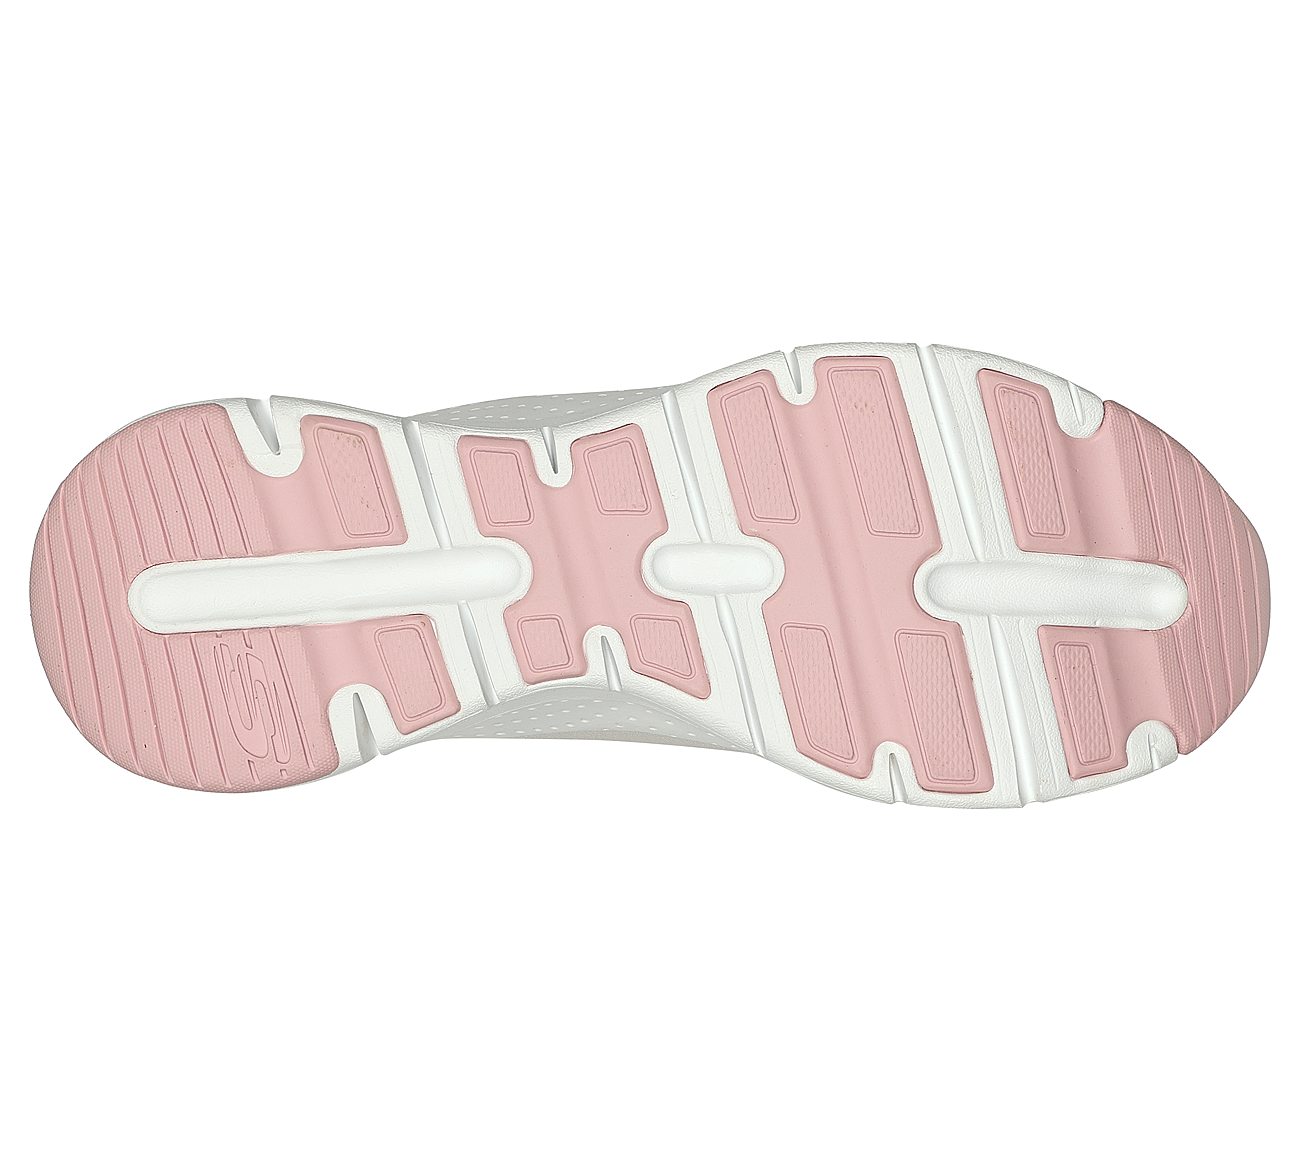 ARCH FIT, OFF WHITE/PINK Footwear Bottom View